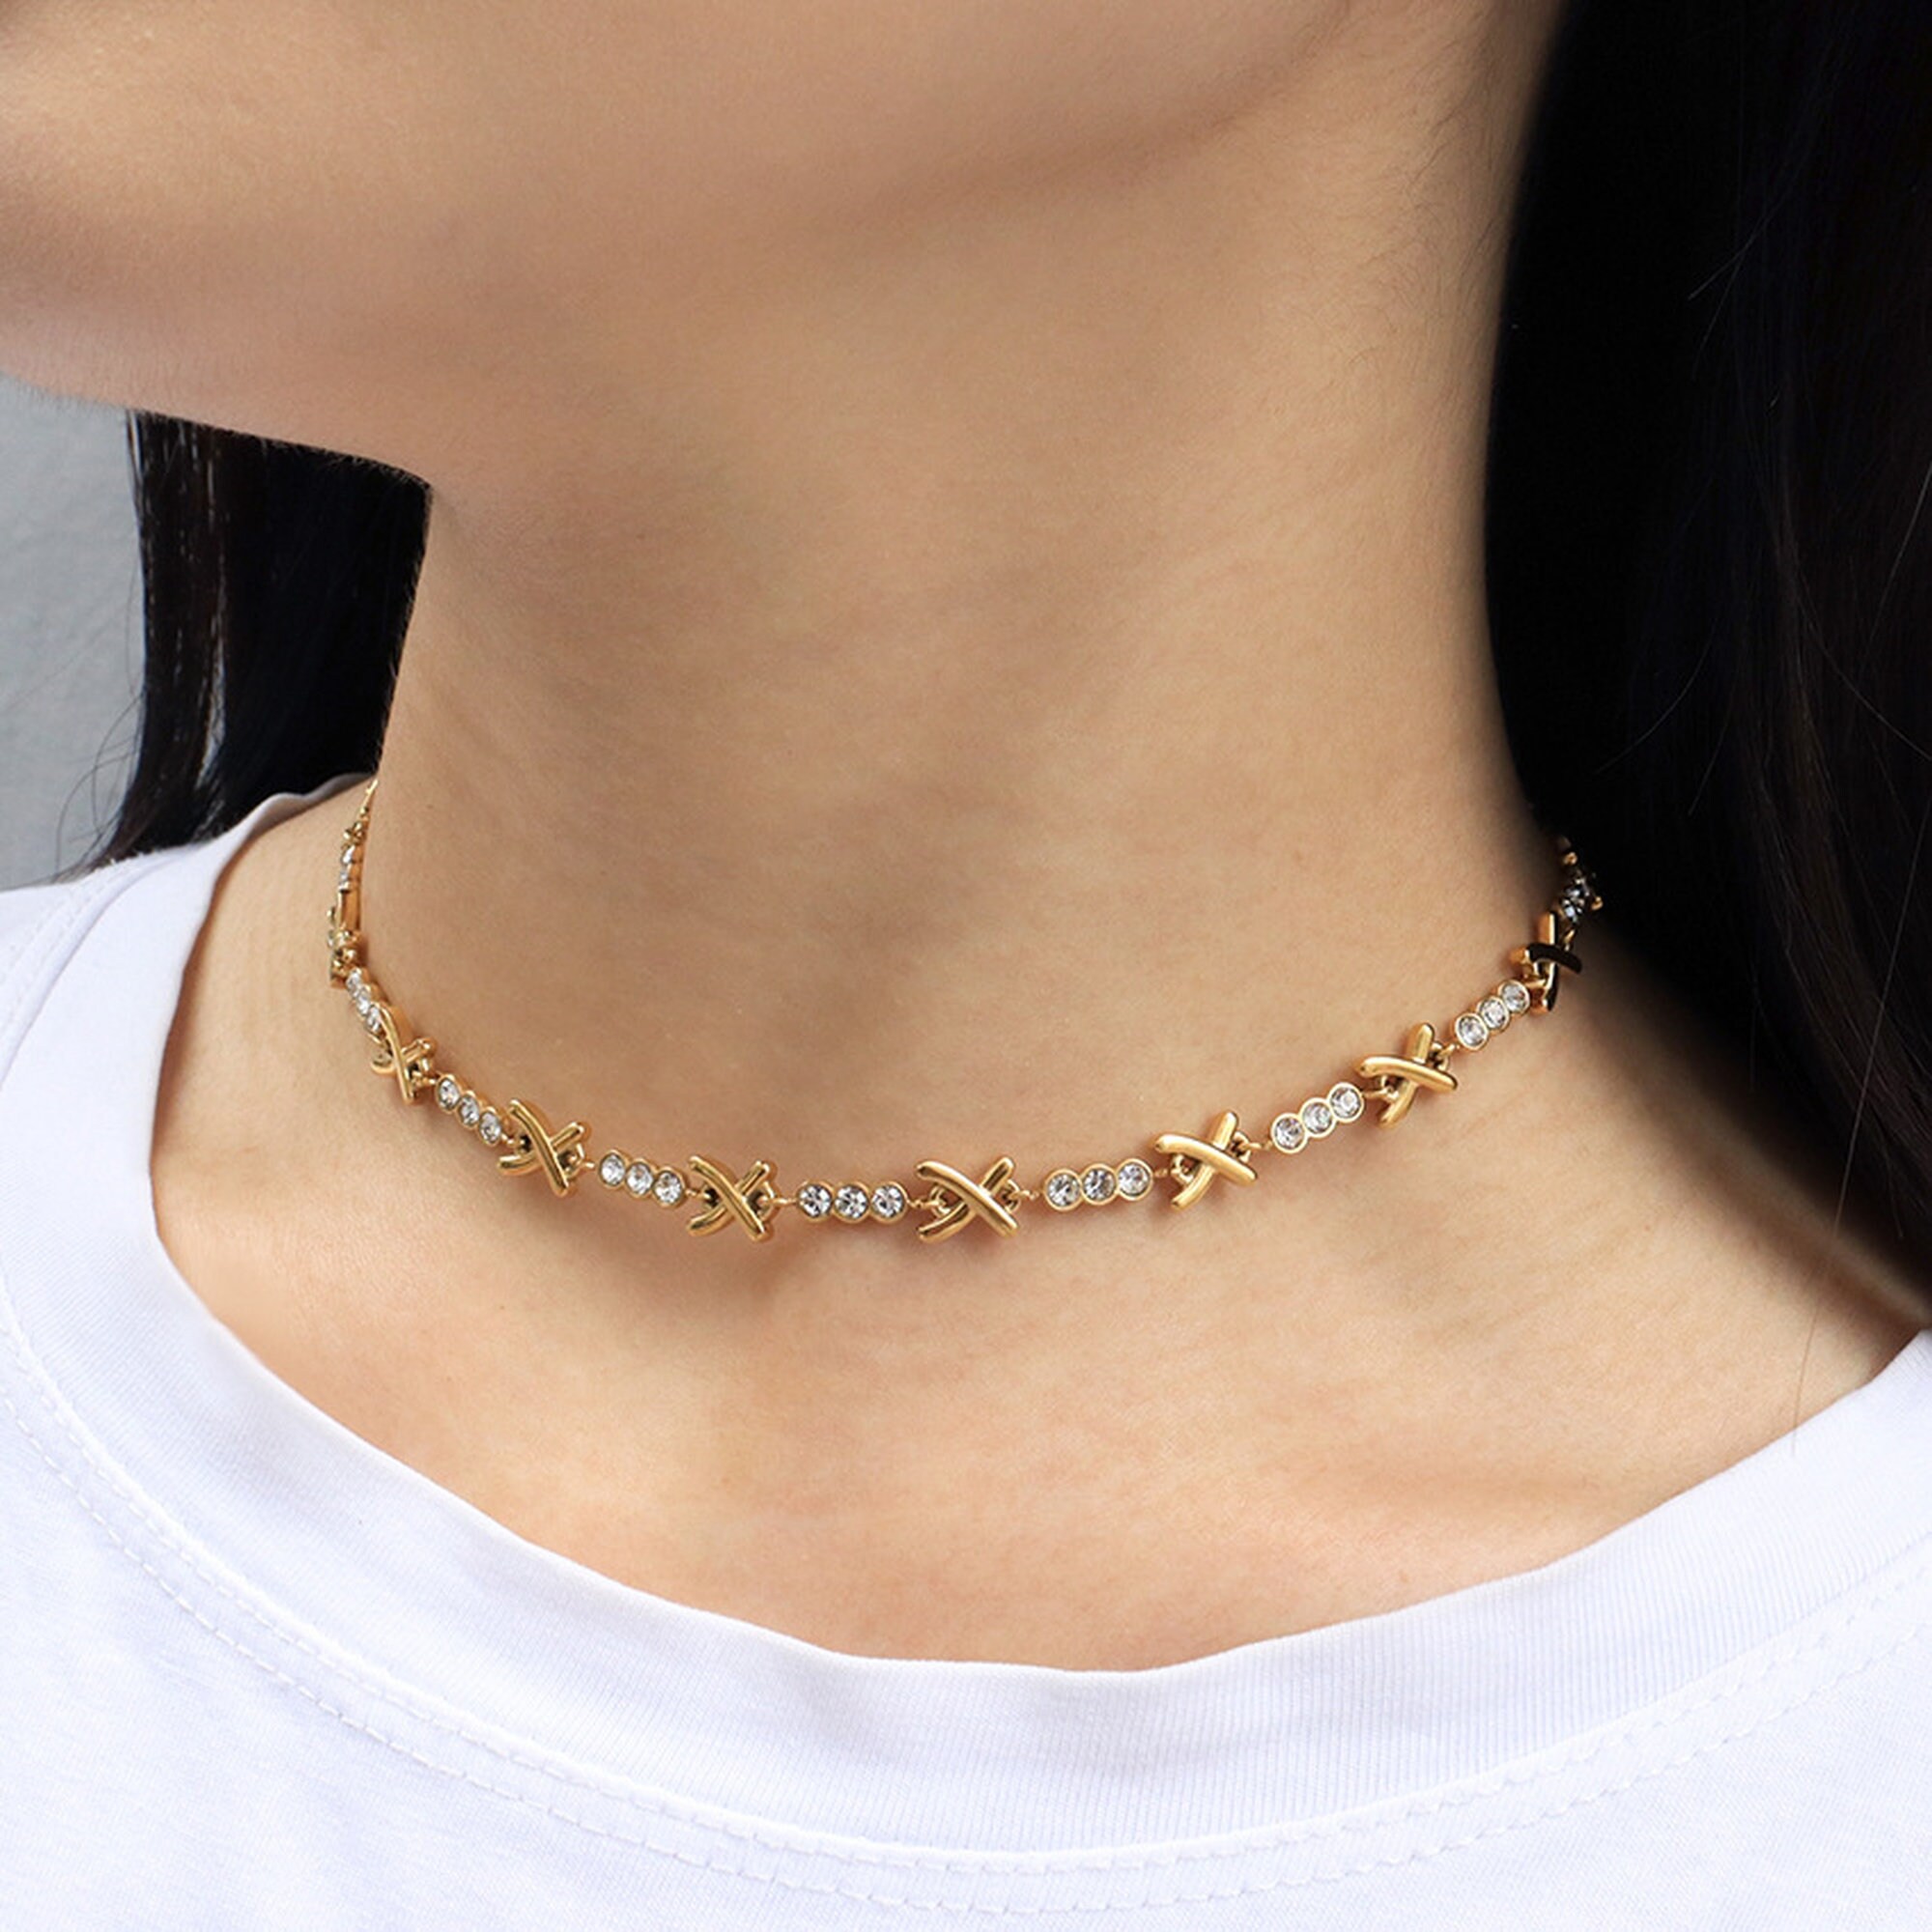 XO Gold Choker Necklace, 18k Gold Plated Necklace With Cubic Zirconia  Diamond, Personal Gift for Her 